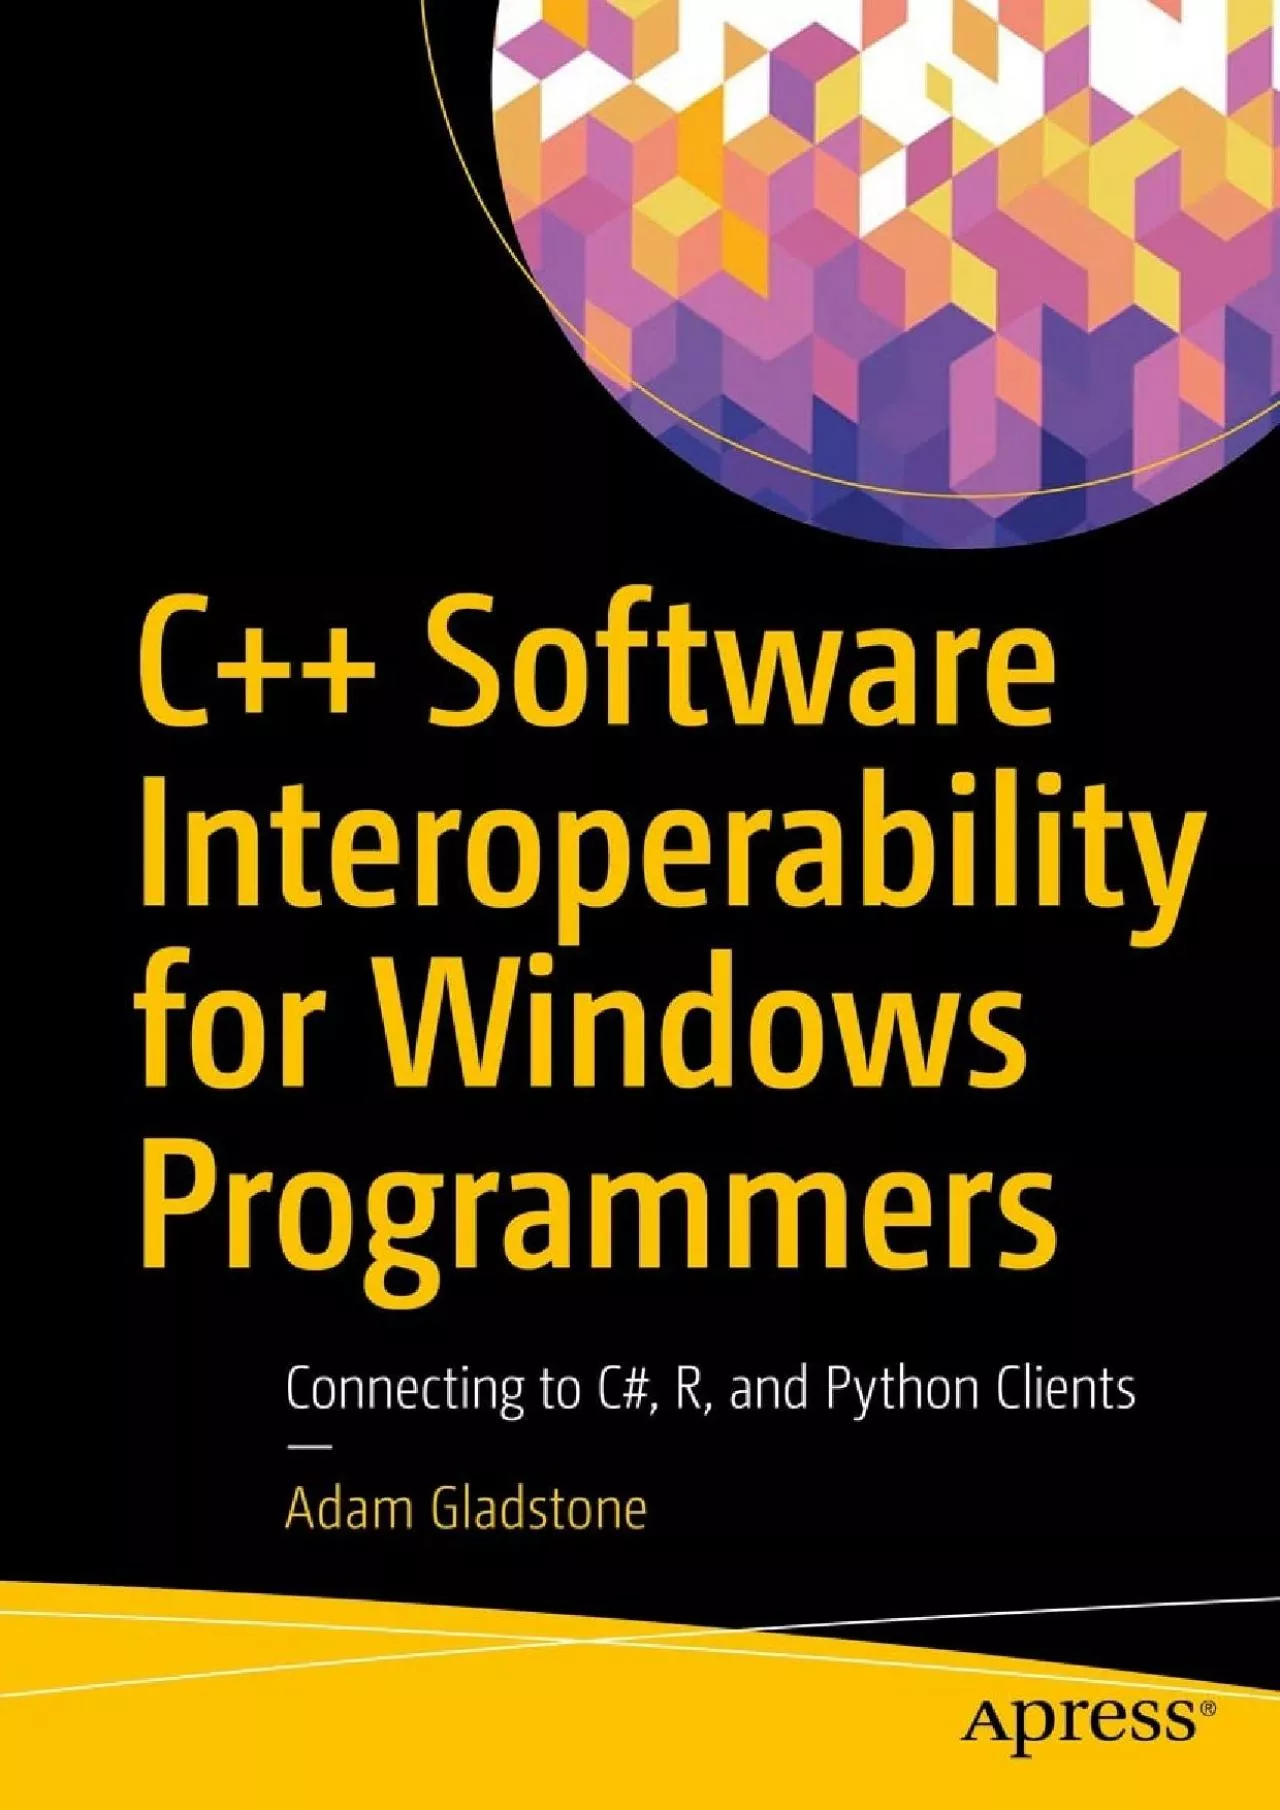 [DOWLOAD]-C++ Software Interoperability for Windows Programmers: Connecting to C, R, and